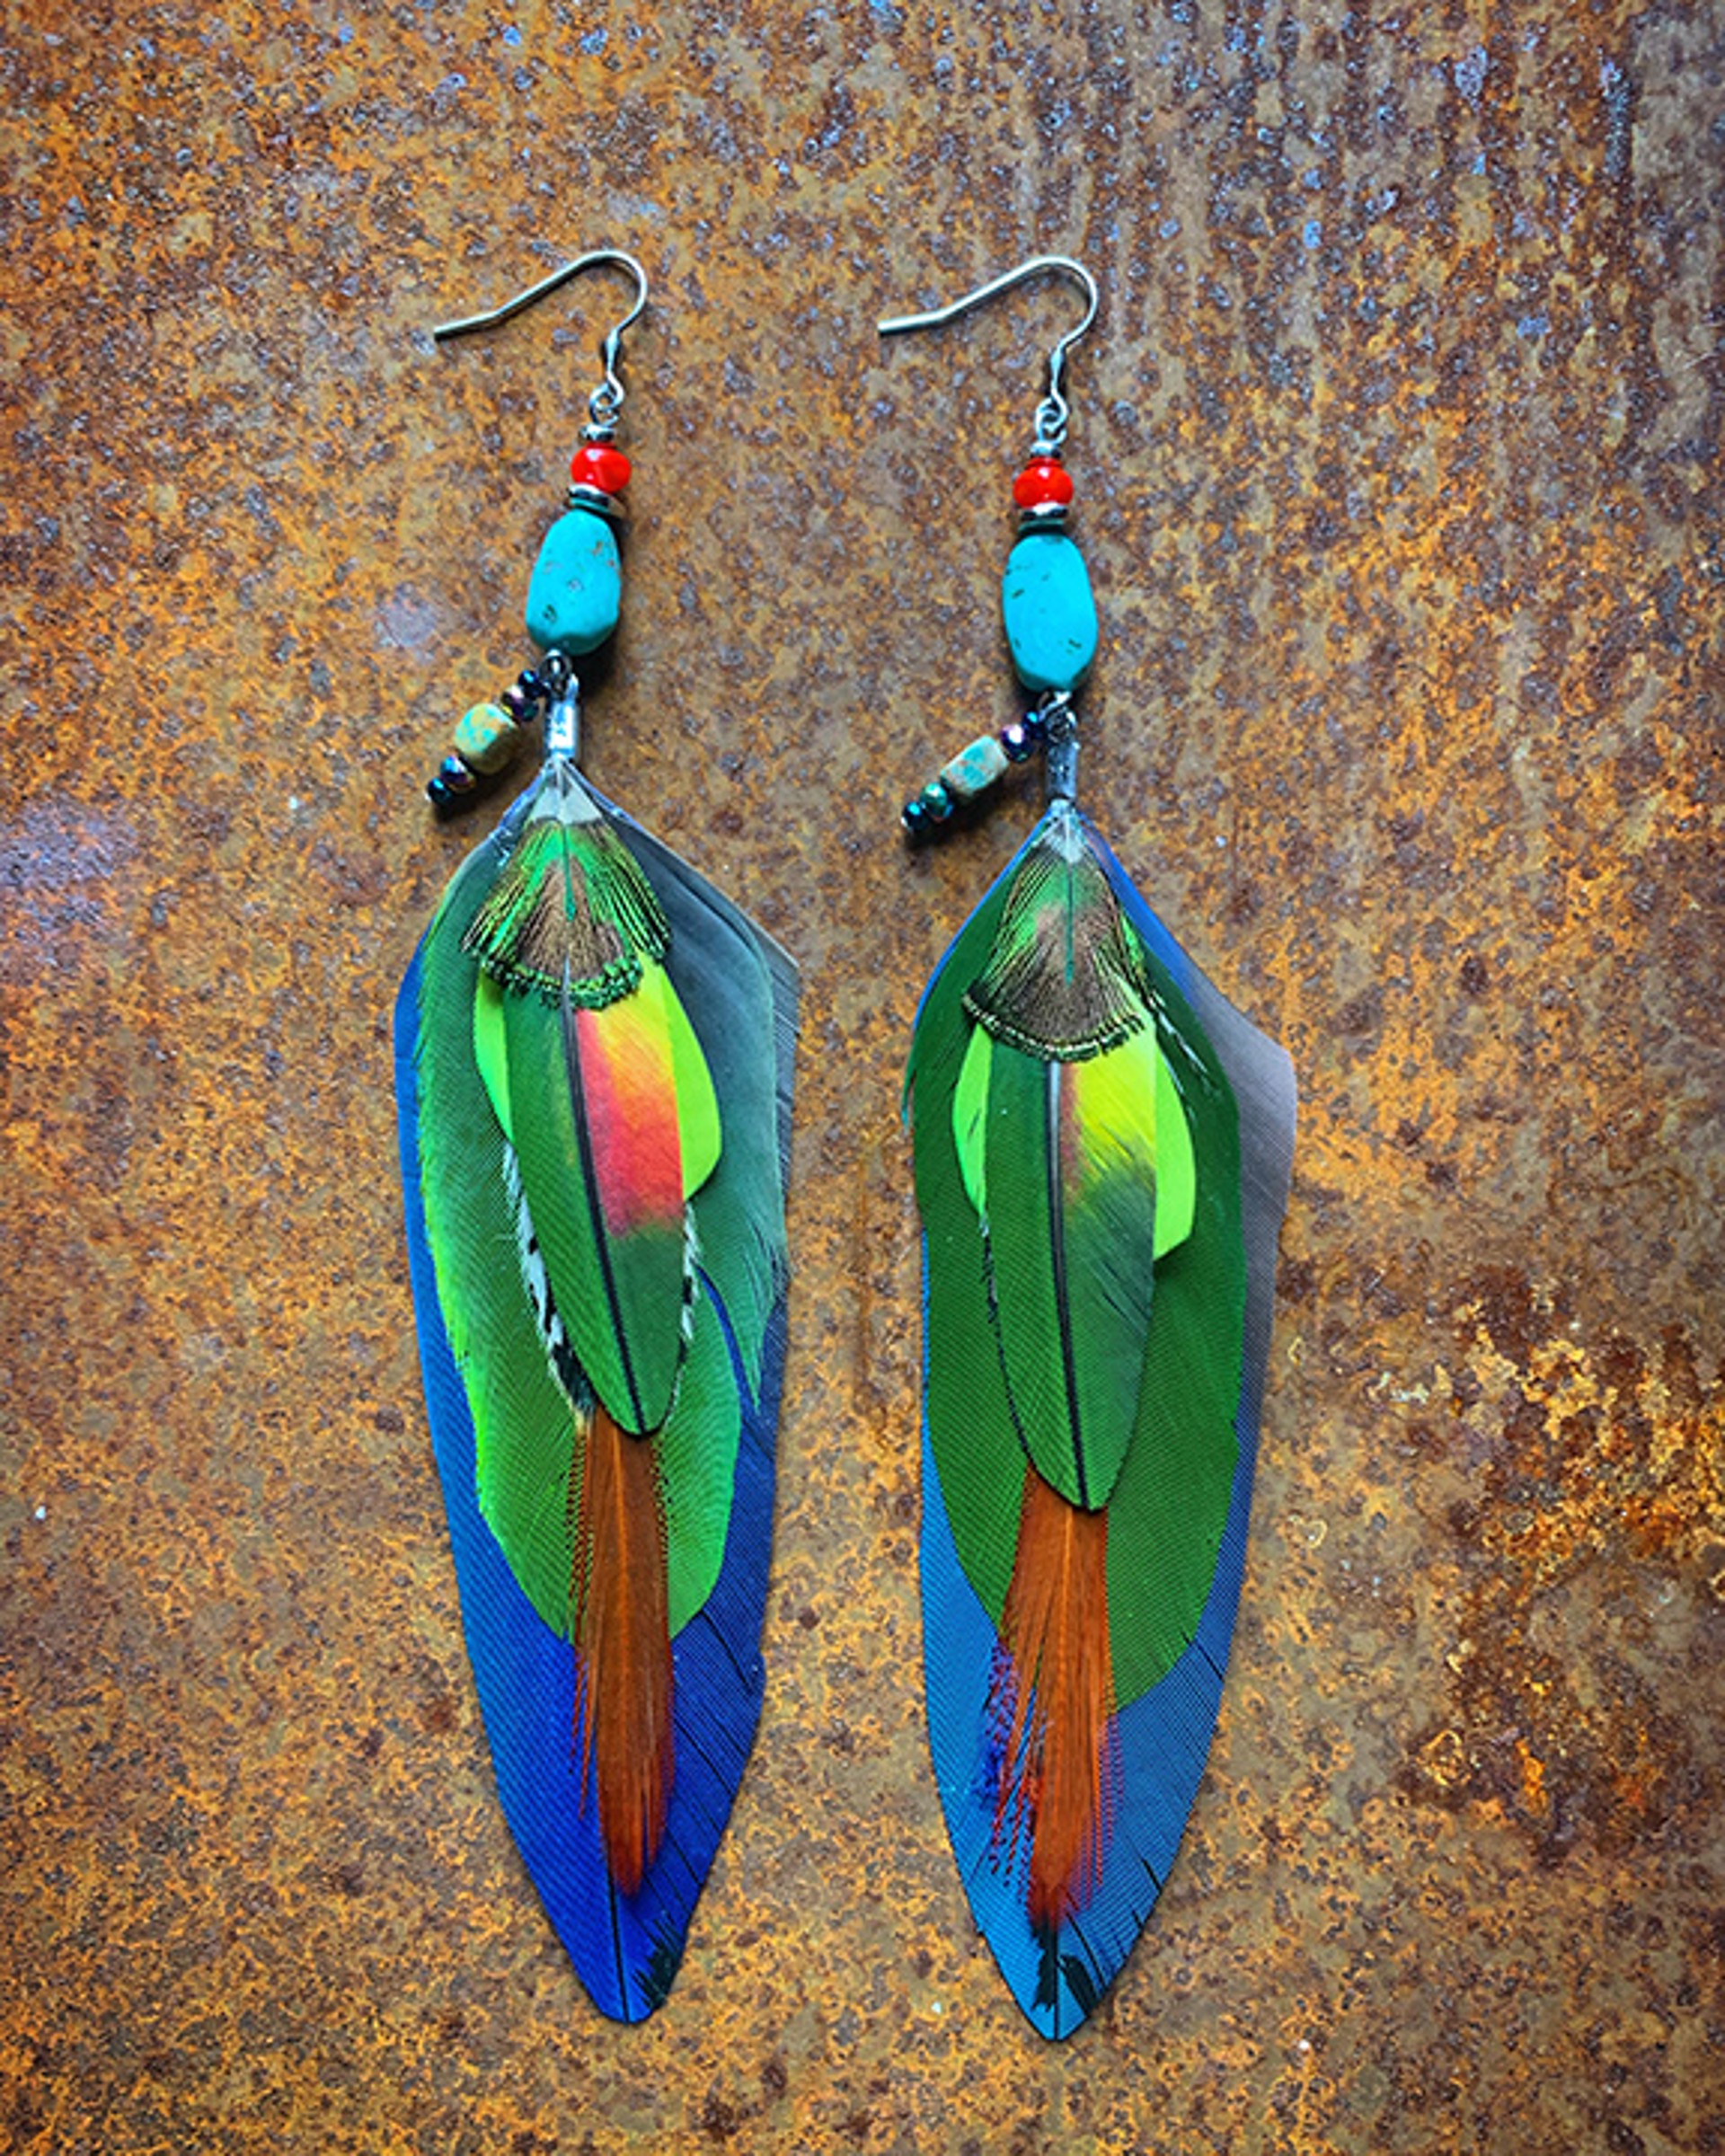 K727 Ethically Sourced Parrot Earrings by Kelly Ormsby